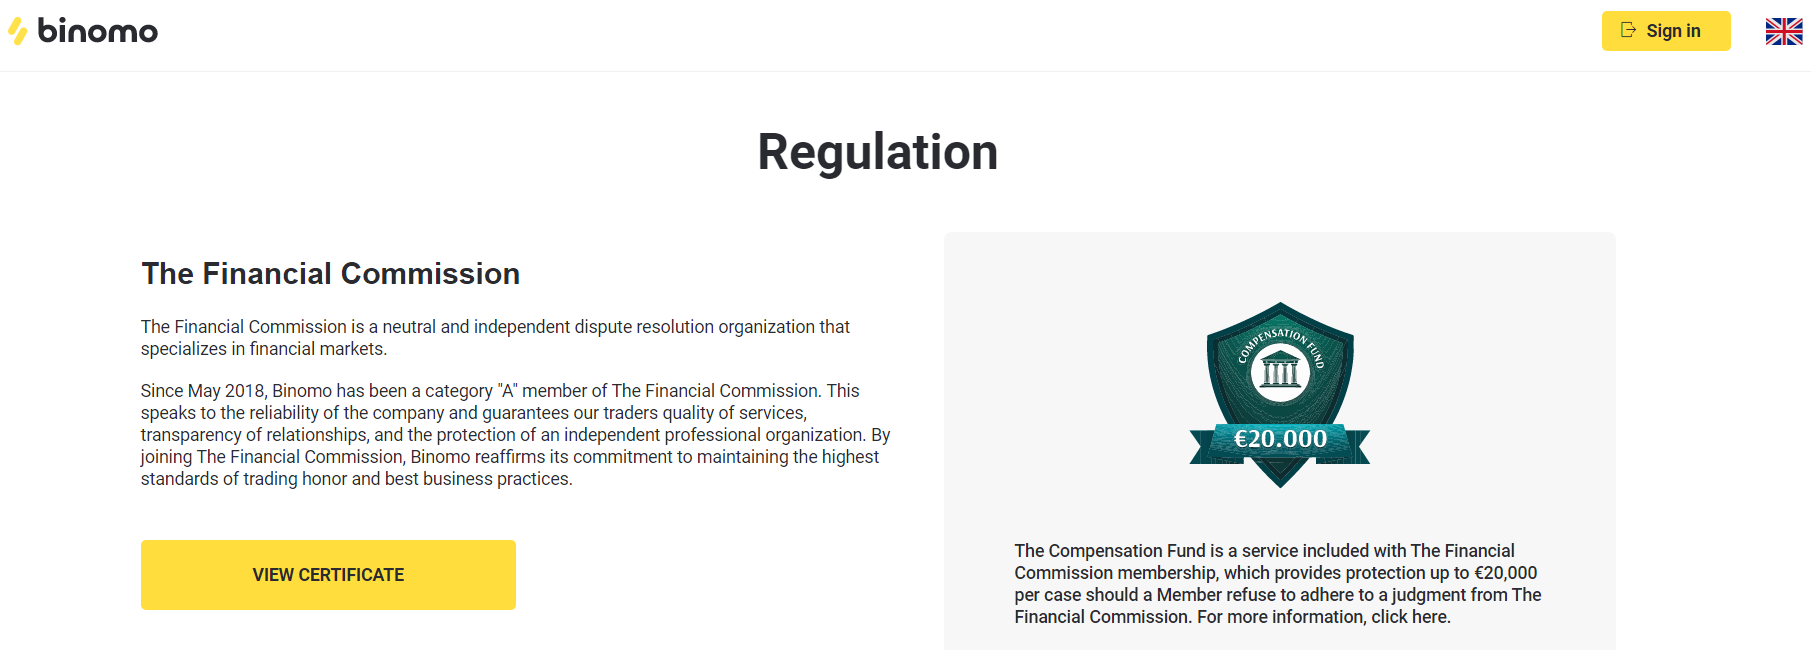 Regulation by International Financial Commission